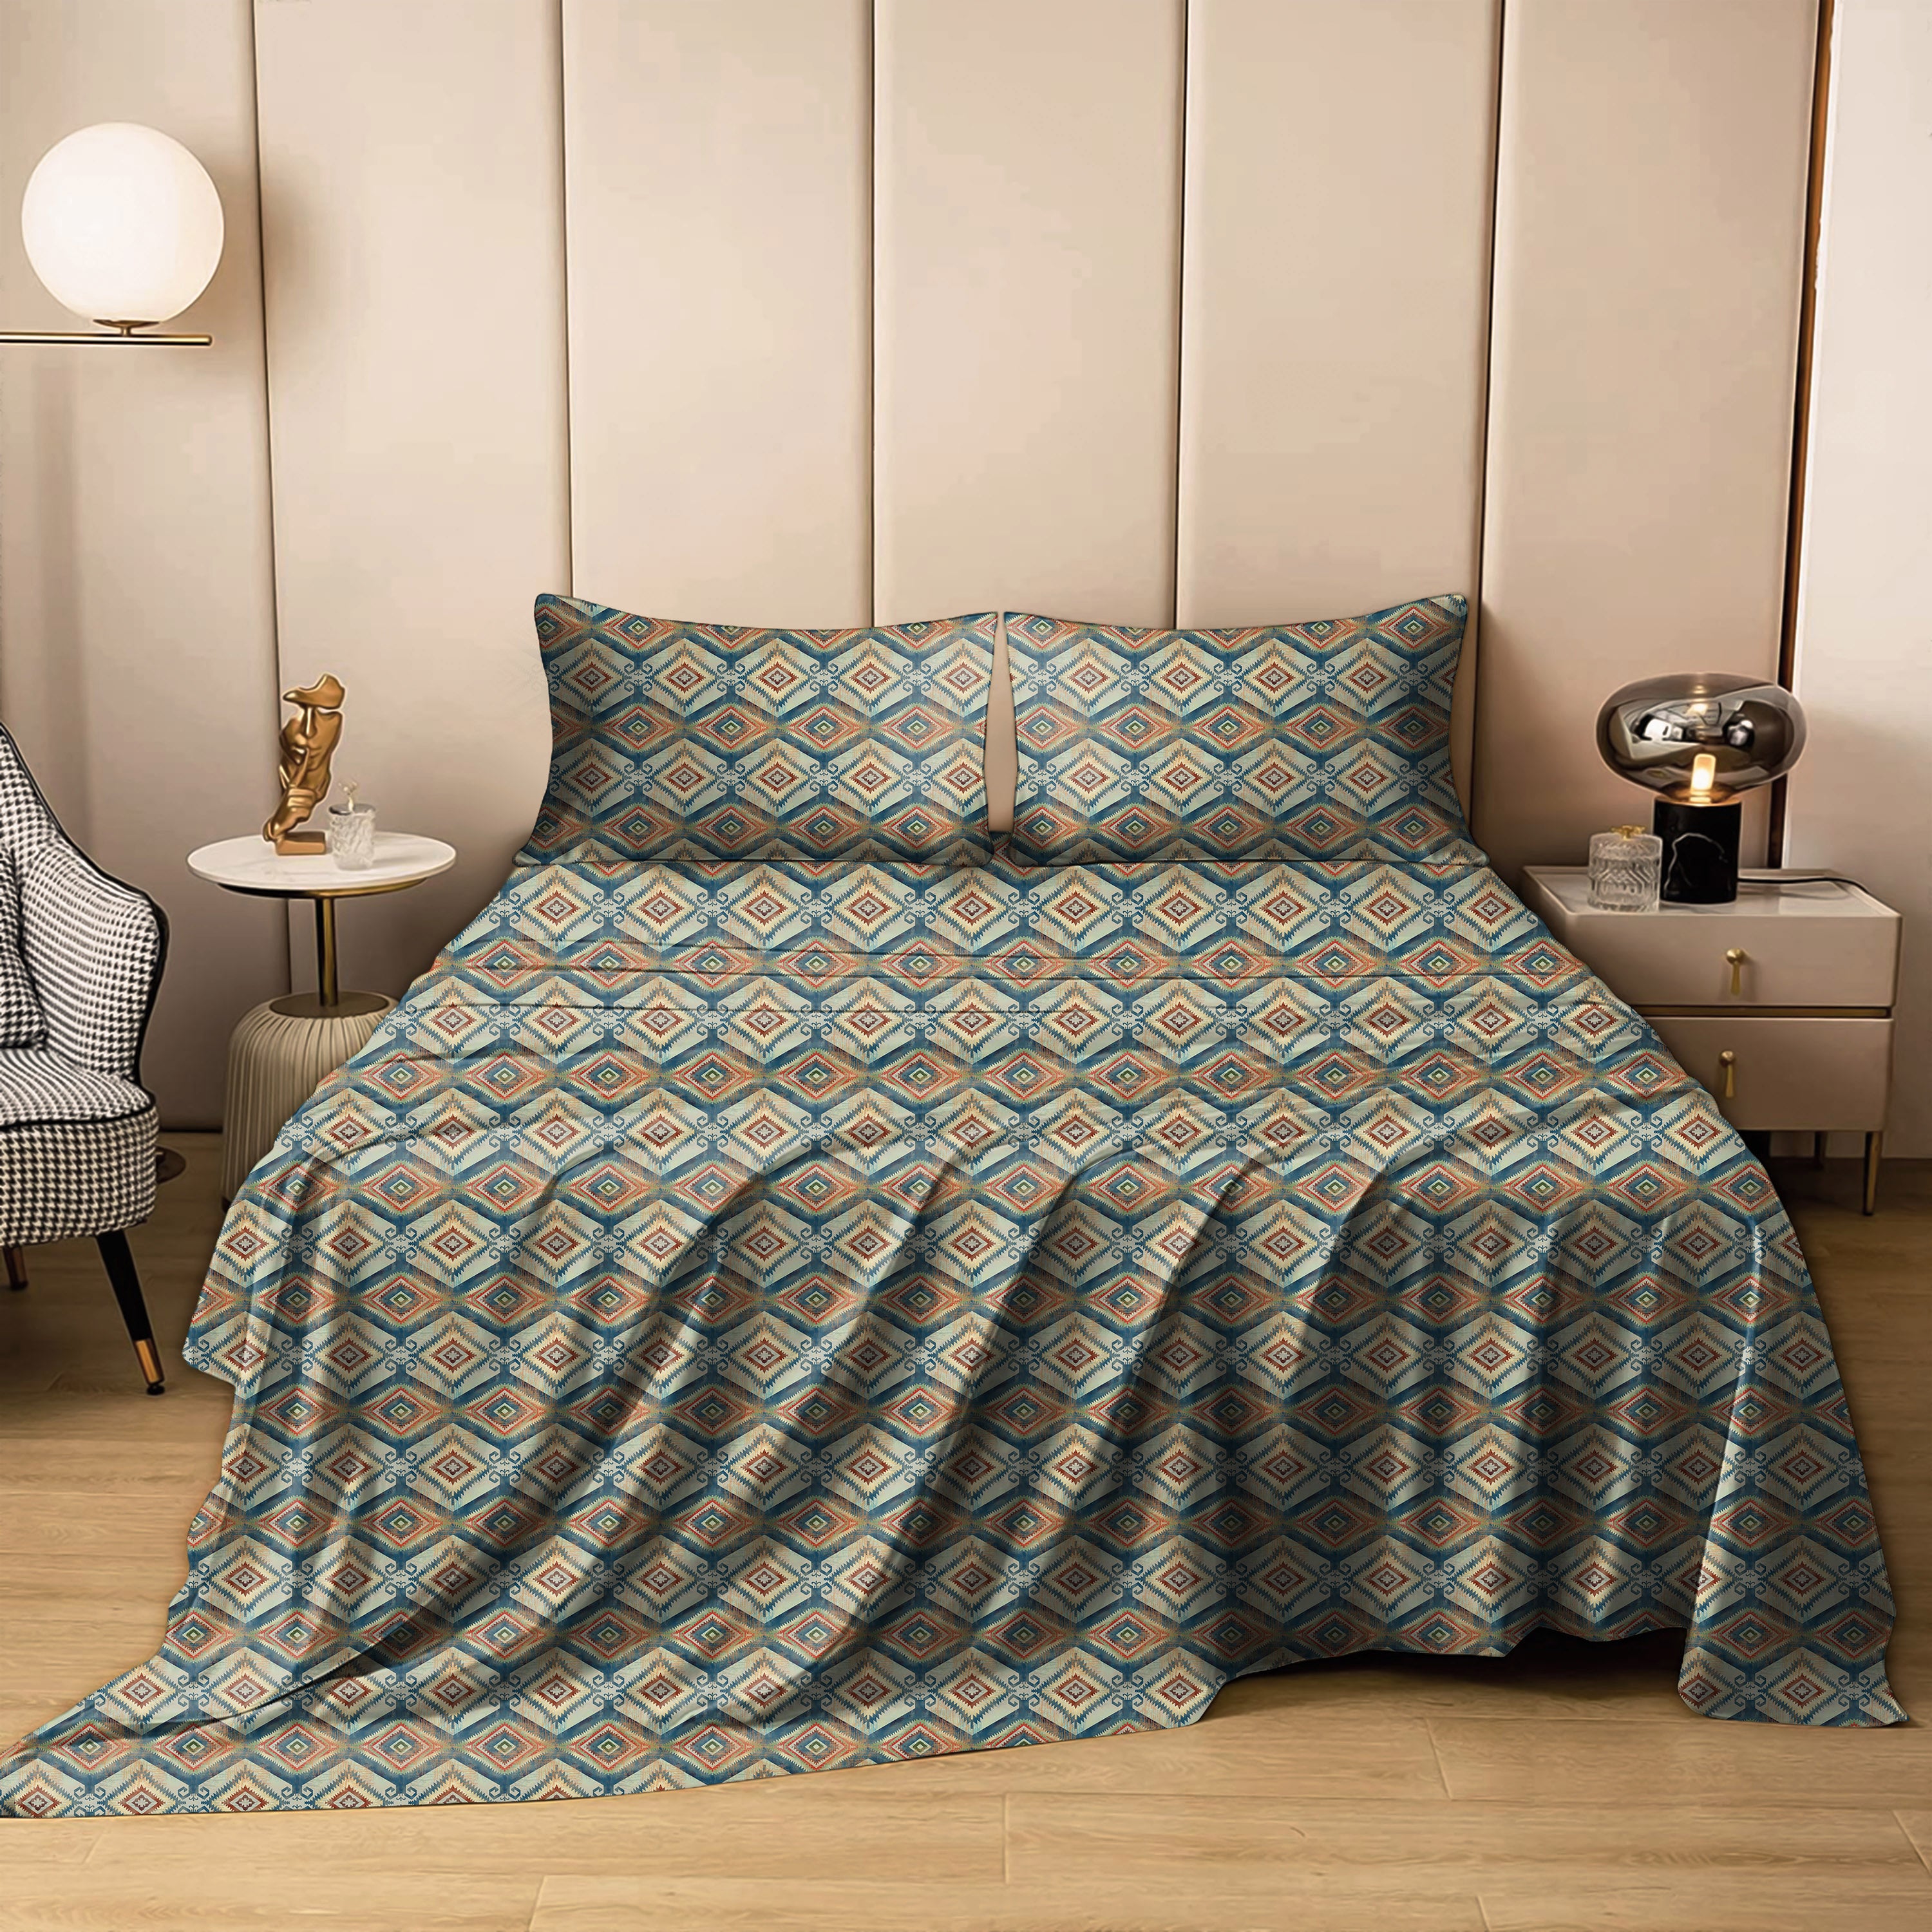 Madrid Blue Bedcover for Double Bed with 2 PillowCovers King Size (104" X 90") Bedspread